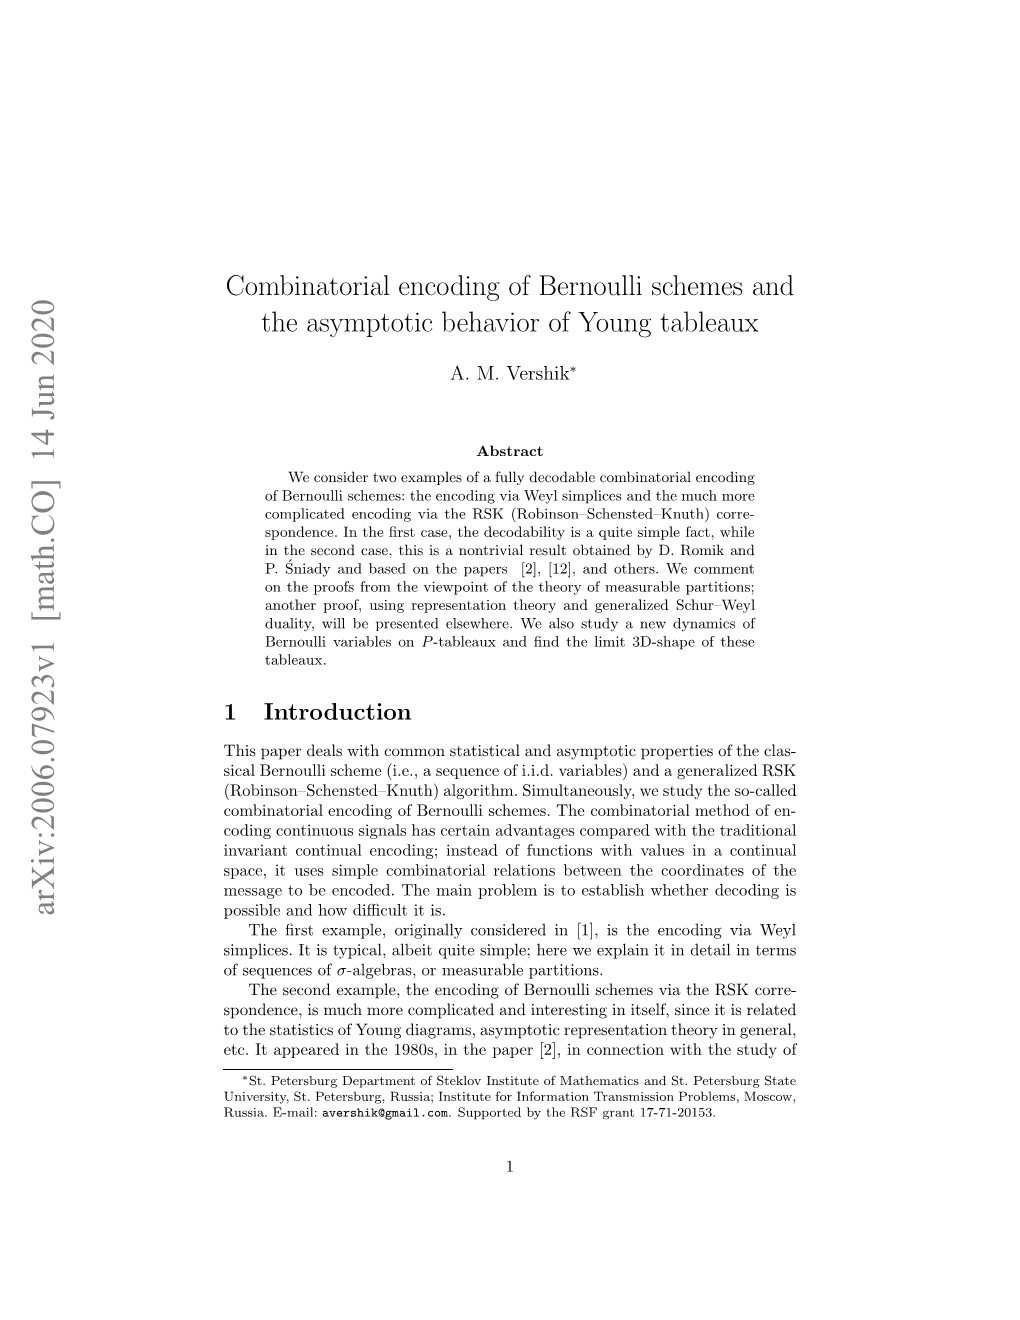 Combinatorial Encoding of Bernoulli Schemes and the Asymptotic